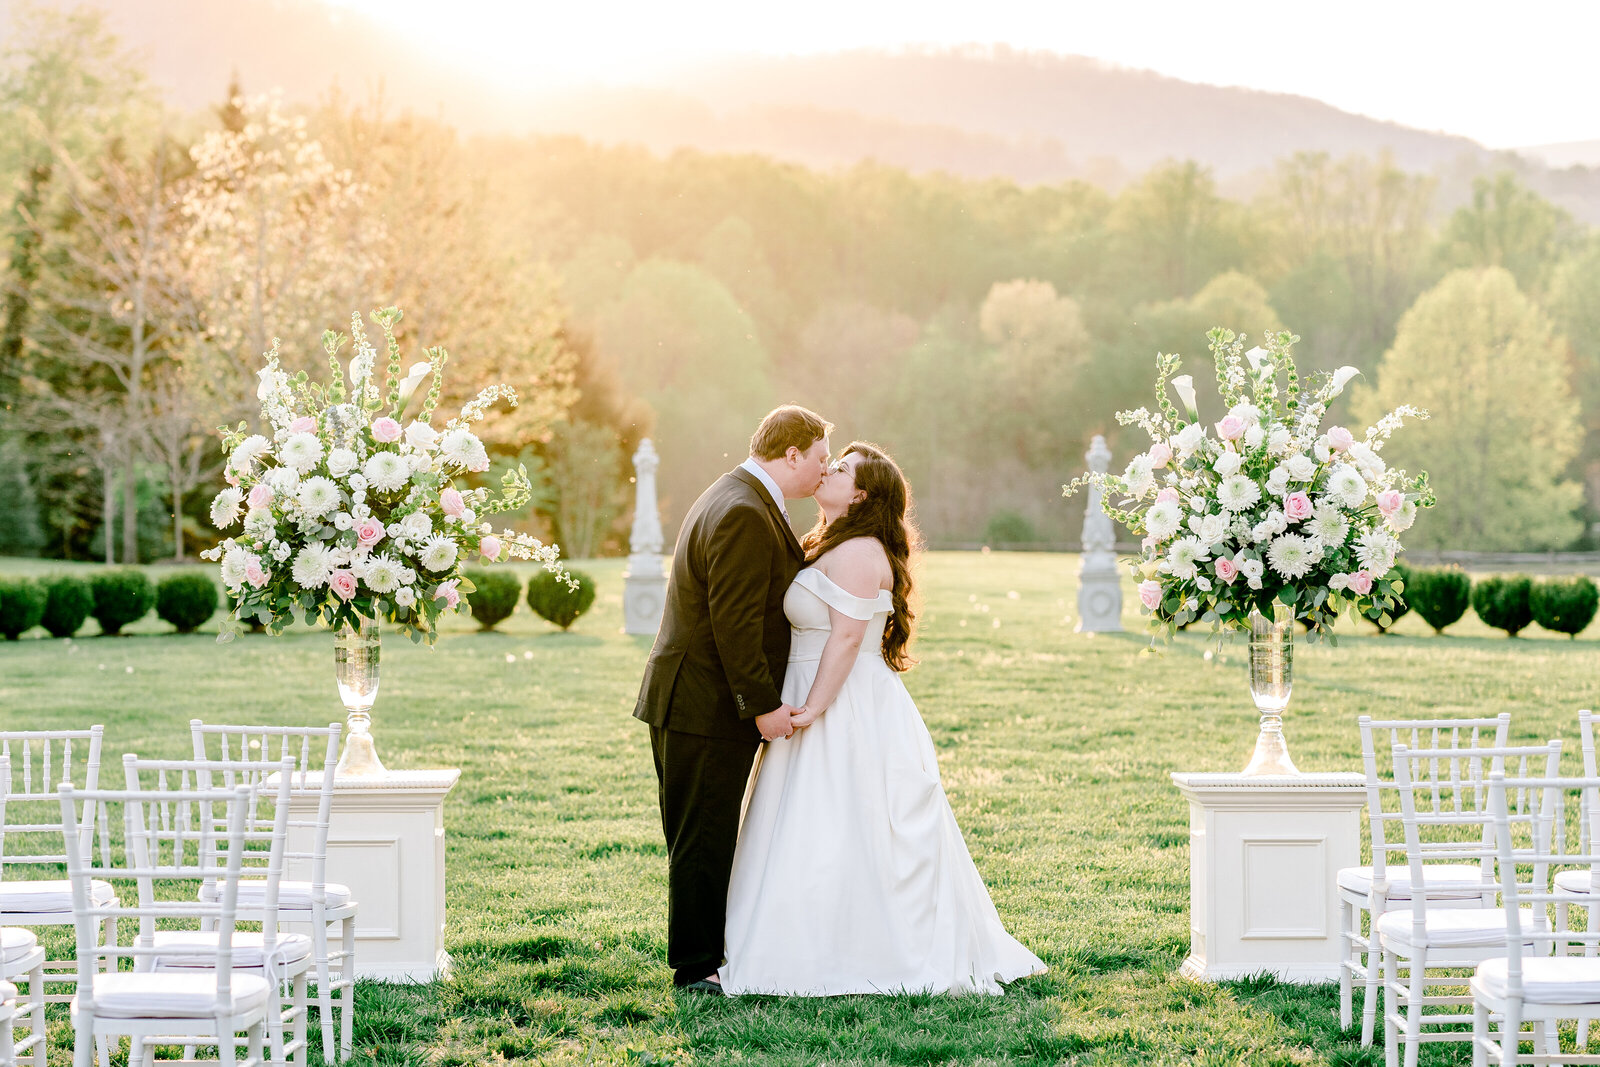 A bride and groom share a kiss in golden hour light during their wedding at The Inn at Little Washington in Virginia